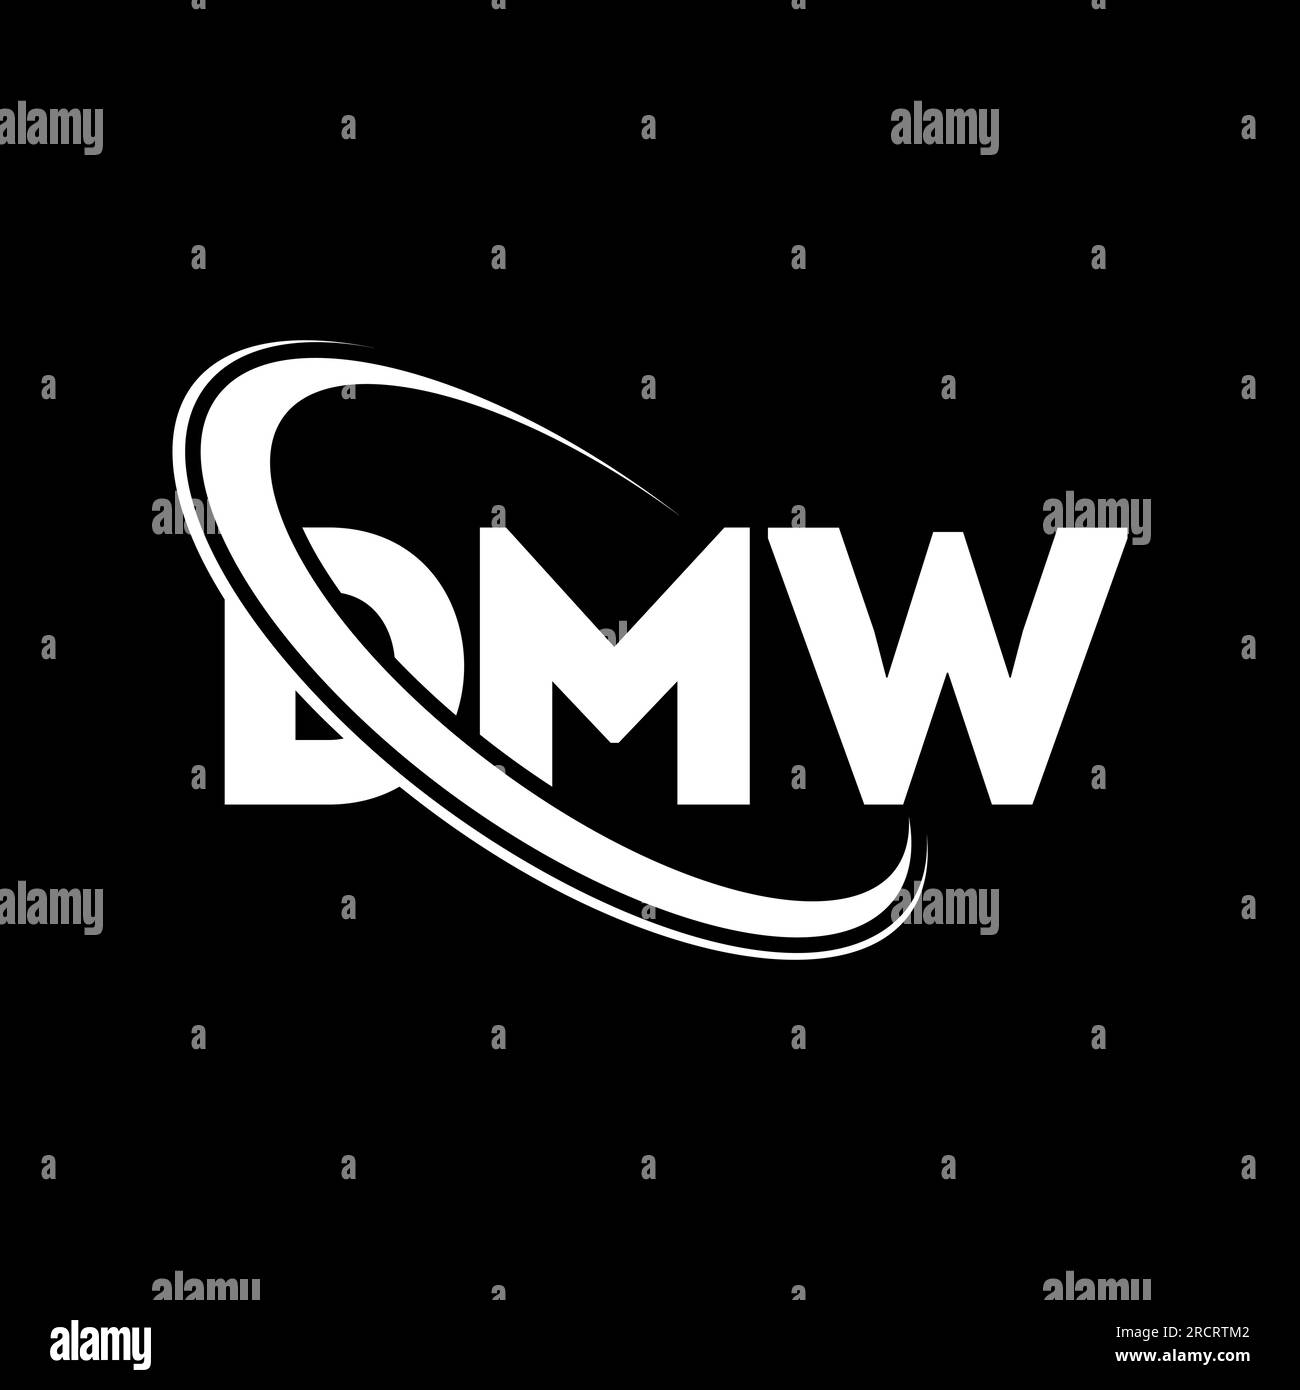 DMW logo. DMW letter. DMW letter logo design. Initials DMW logo linked with circle and uppercase monogram logo. DMW typography for technology, busines Stock Vector